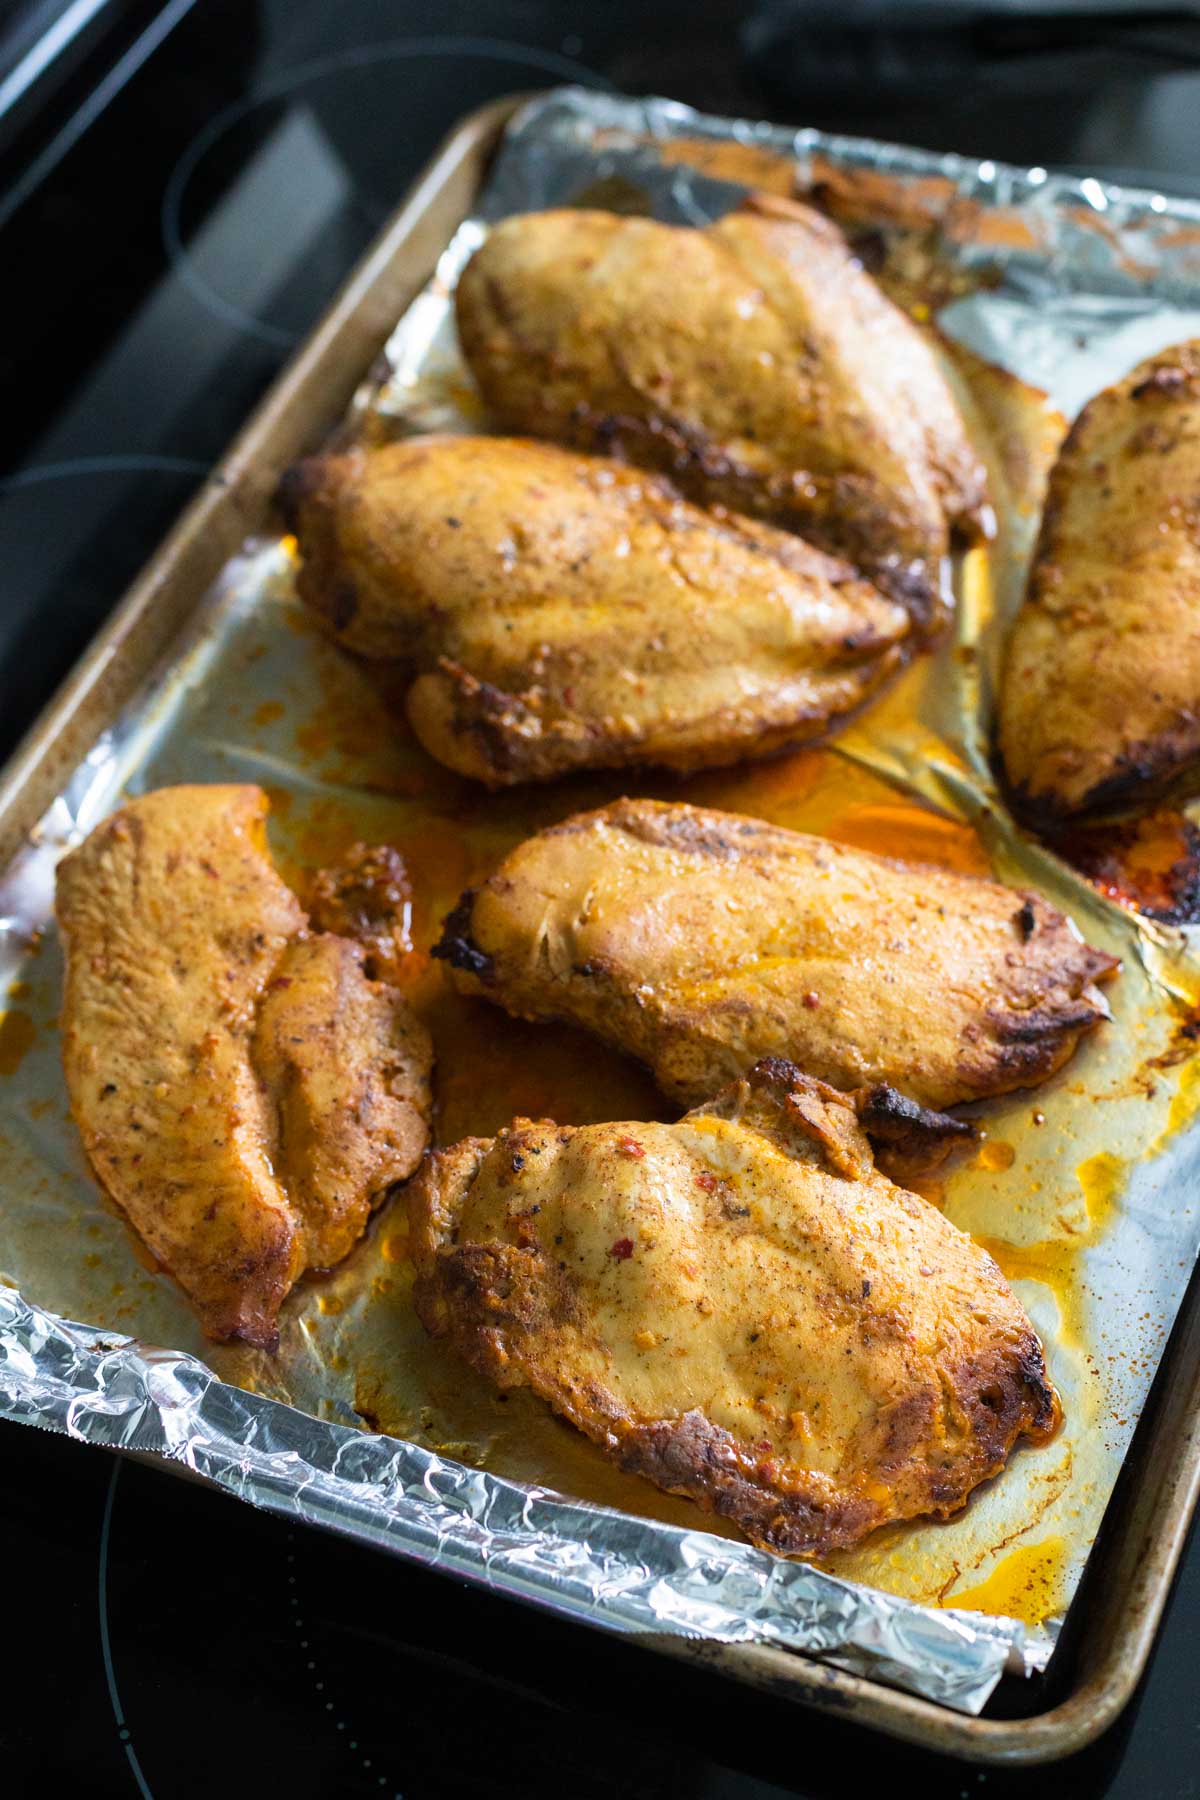 Seasoned chicken is on a large roasting pan lined with foil.